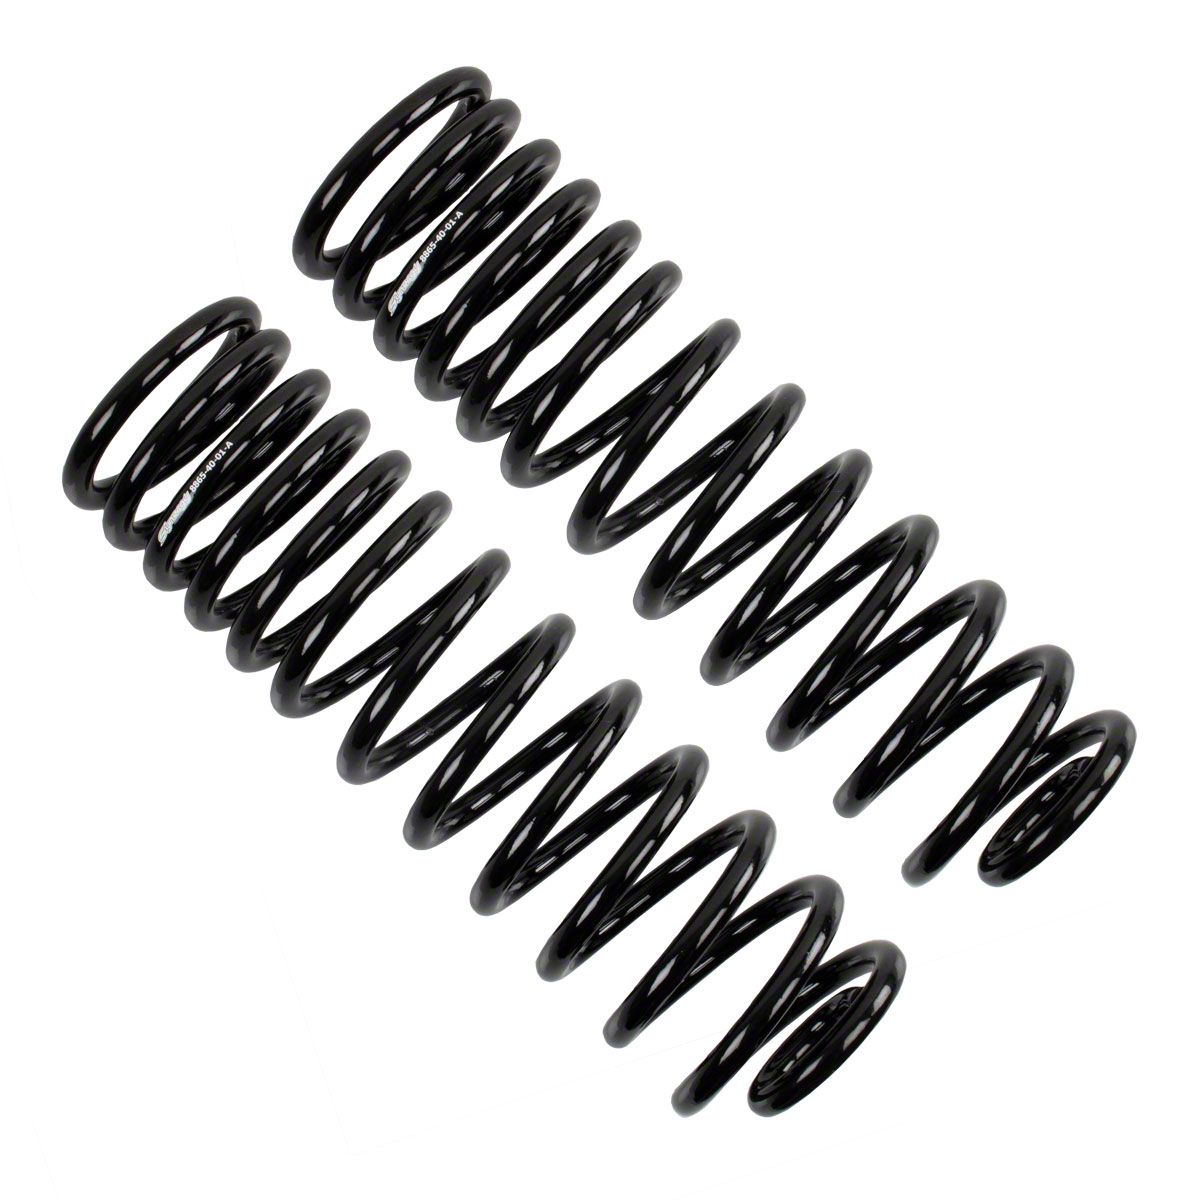 Synergy Manufacturing Jeep Gladiator 2-Inch Rear Lift Coil Springs 8865 ...